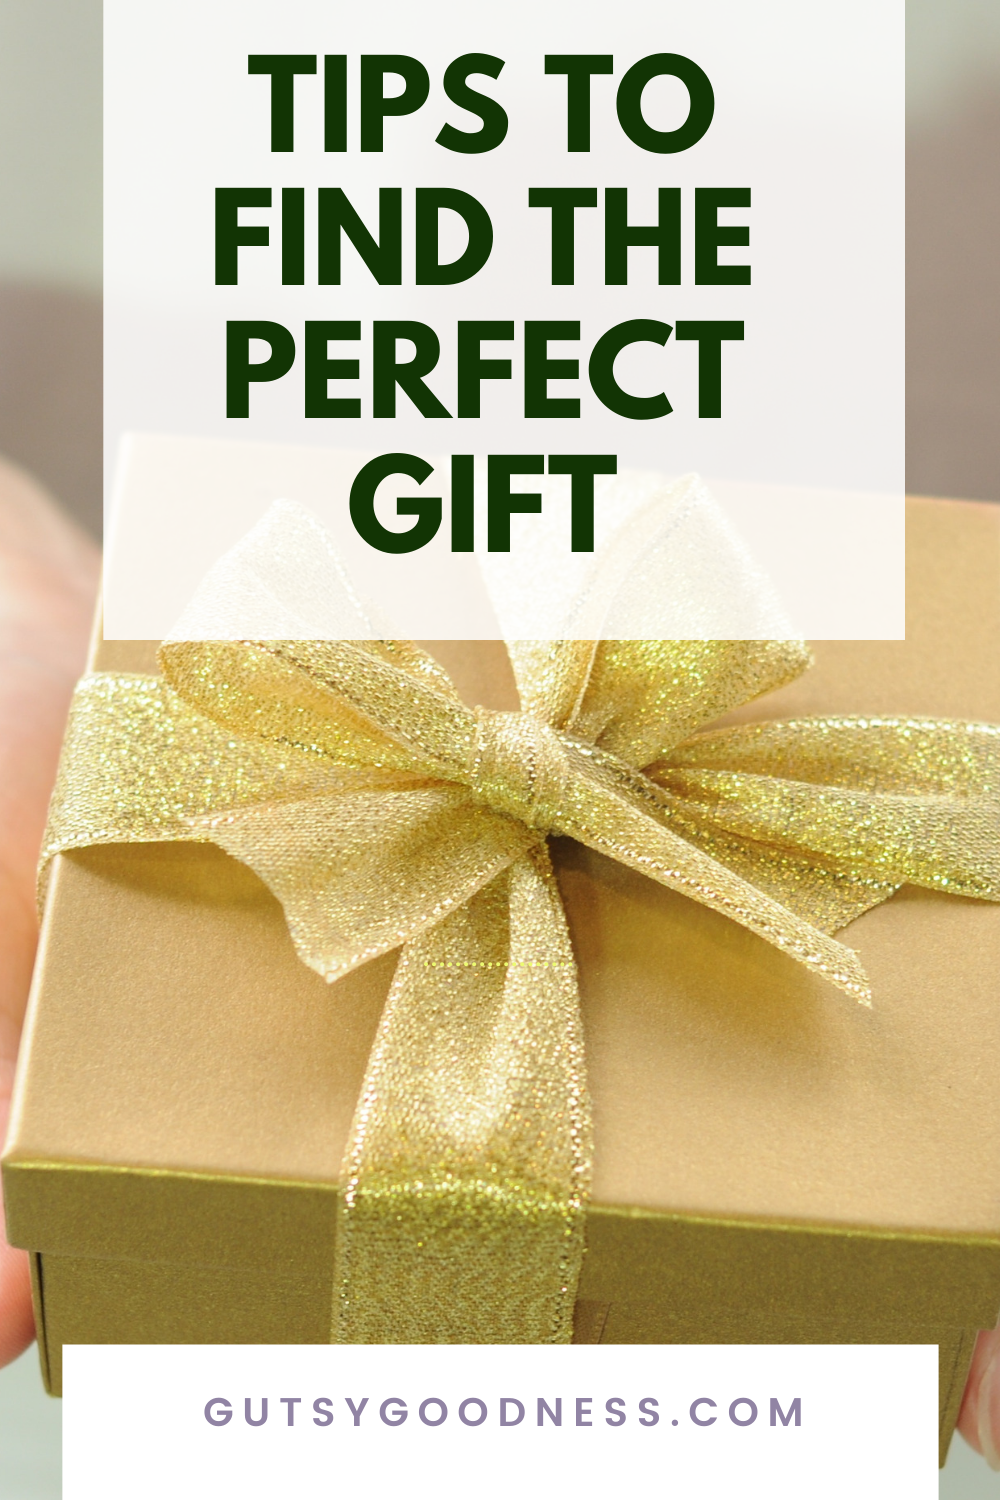 9 Tips To Choose The Perfect Gift For Someone You Care About